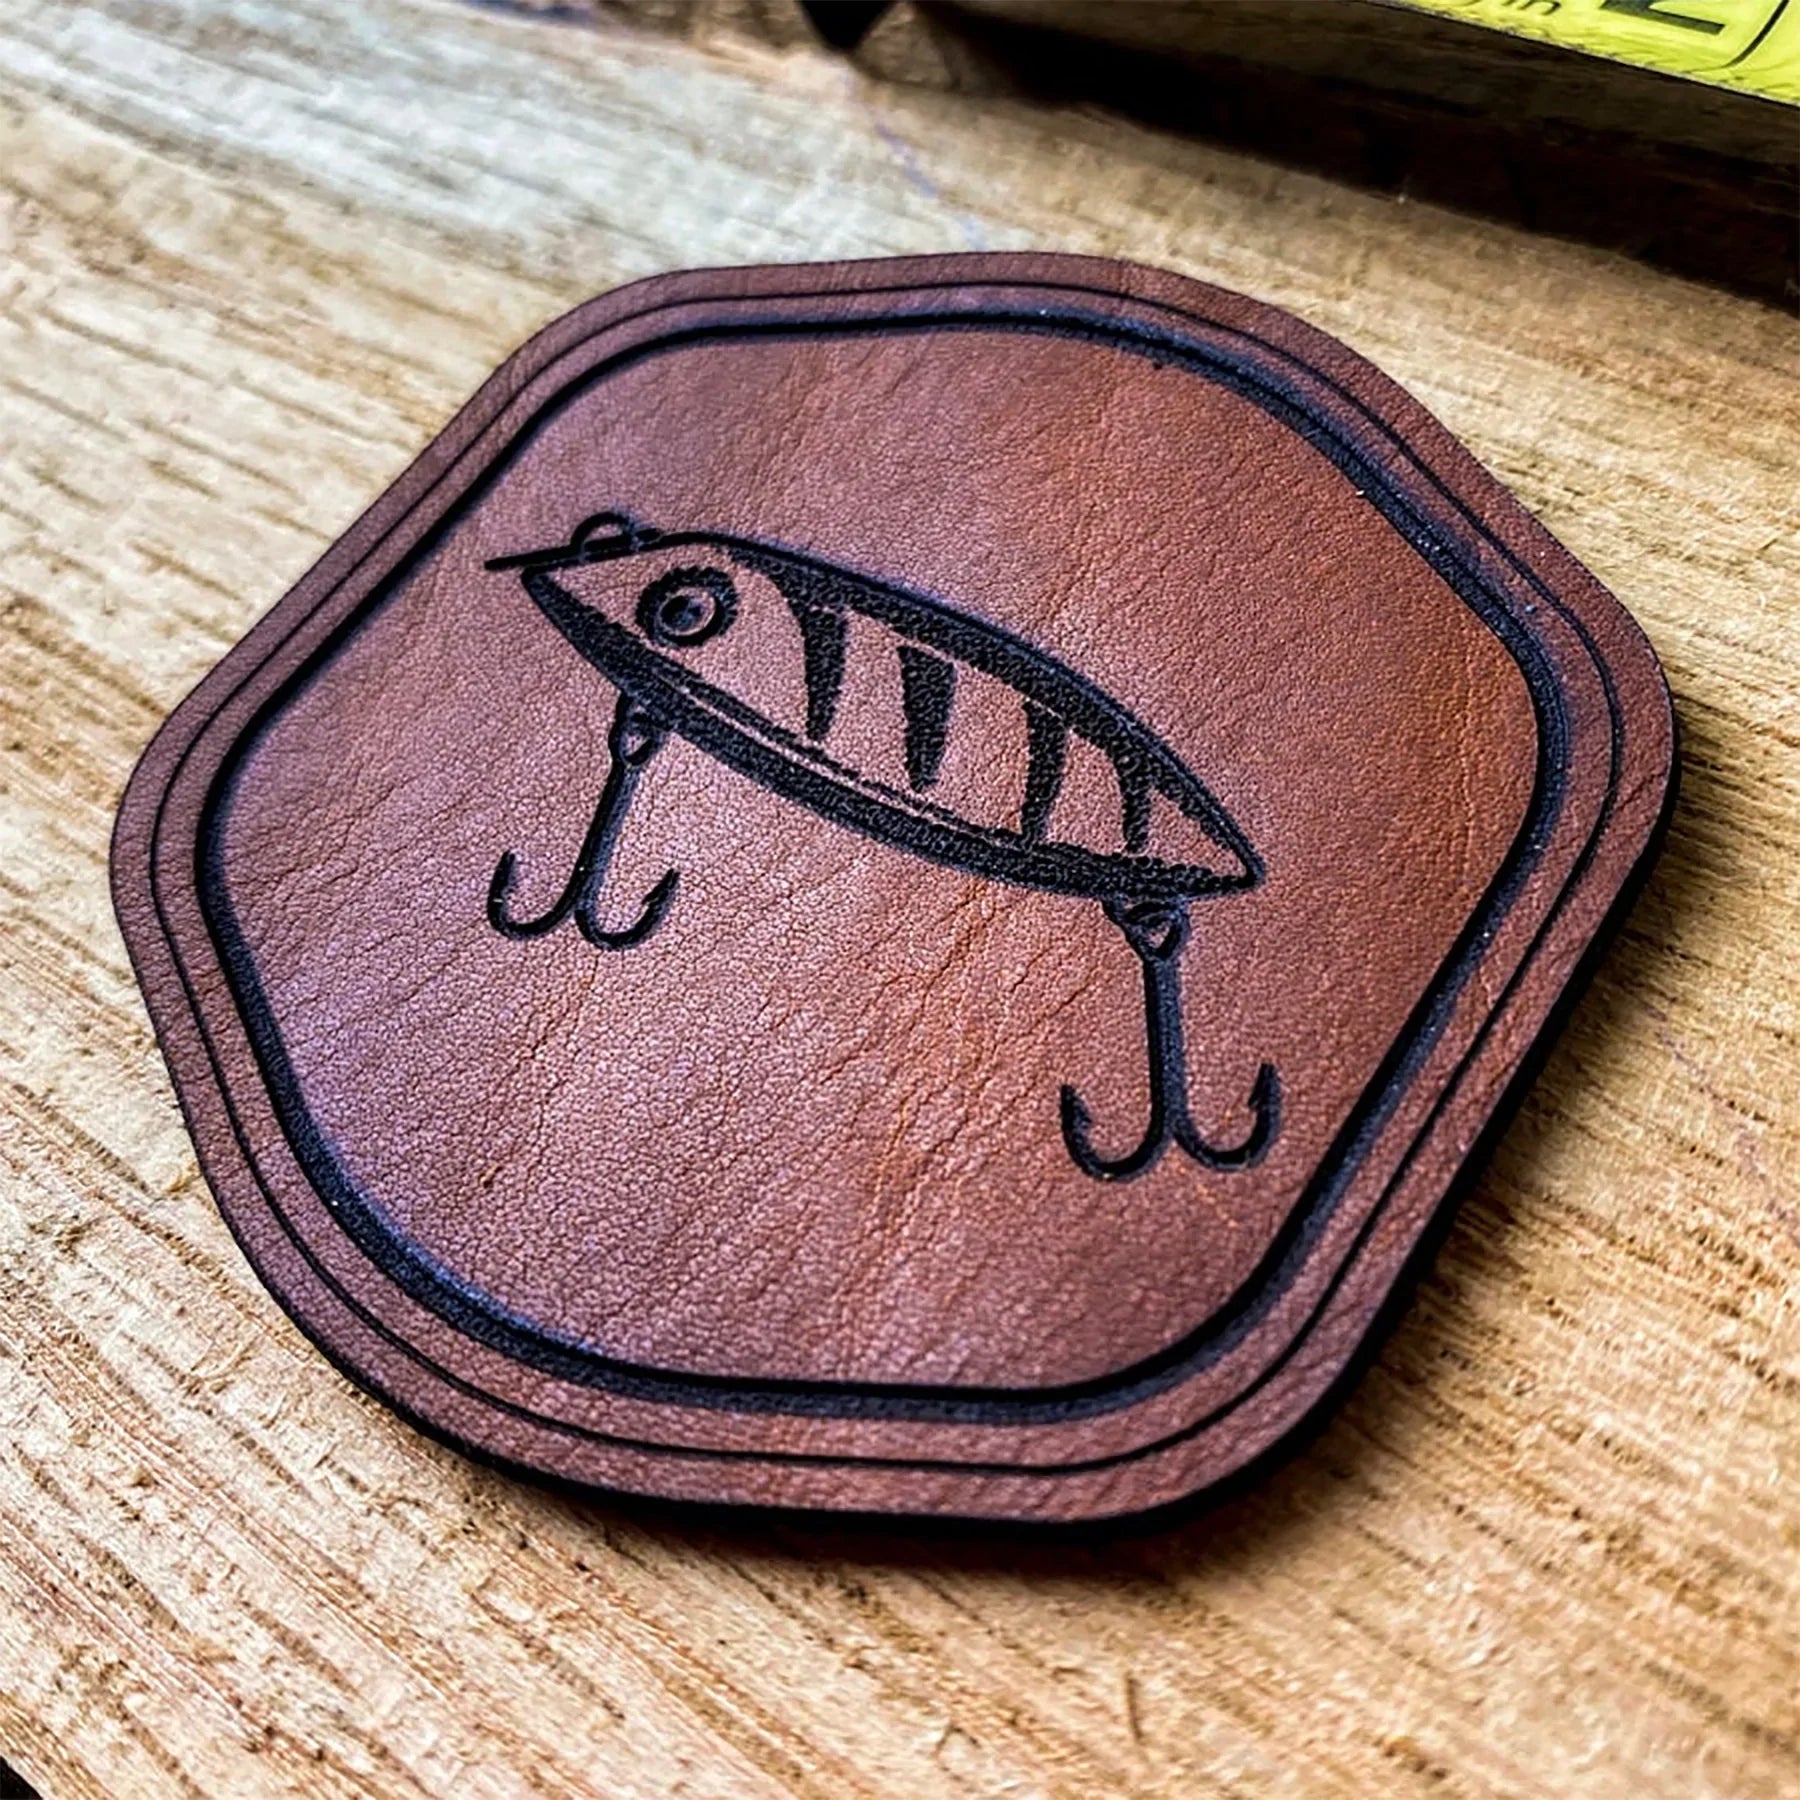 😁👀Making Leather Patches For Hats and Apparel With Your Co2